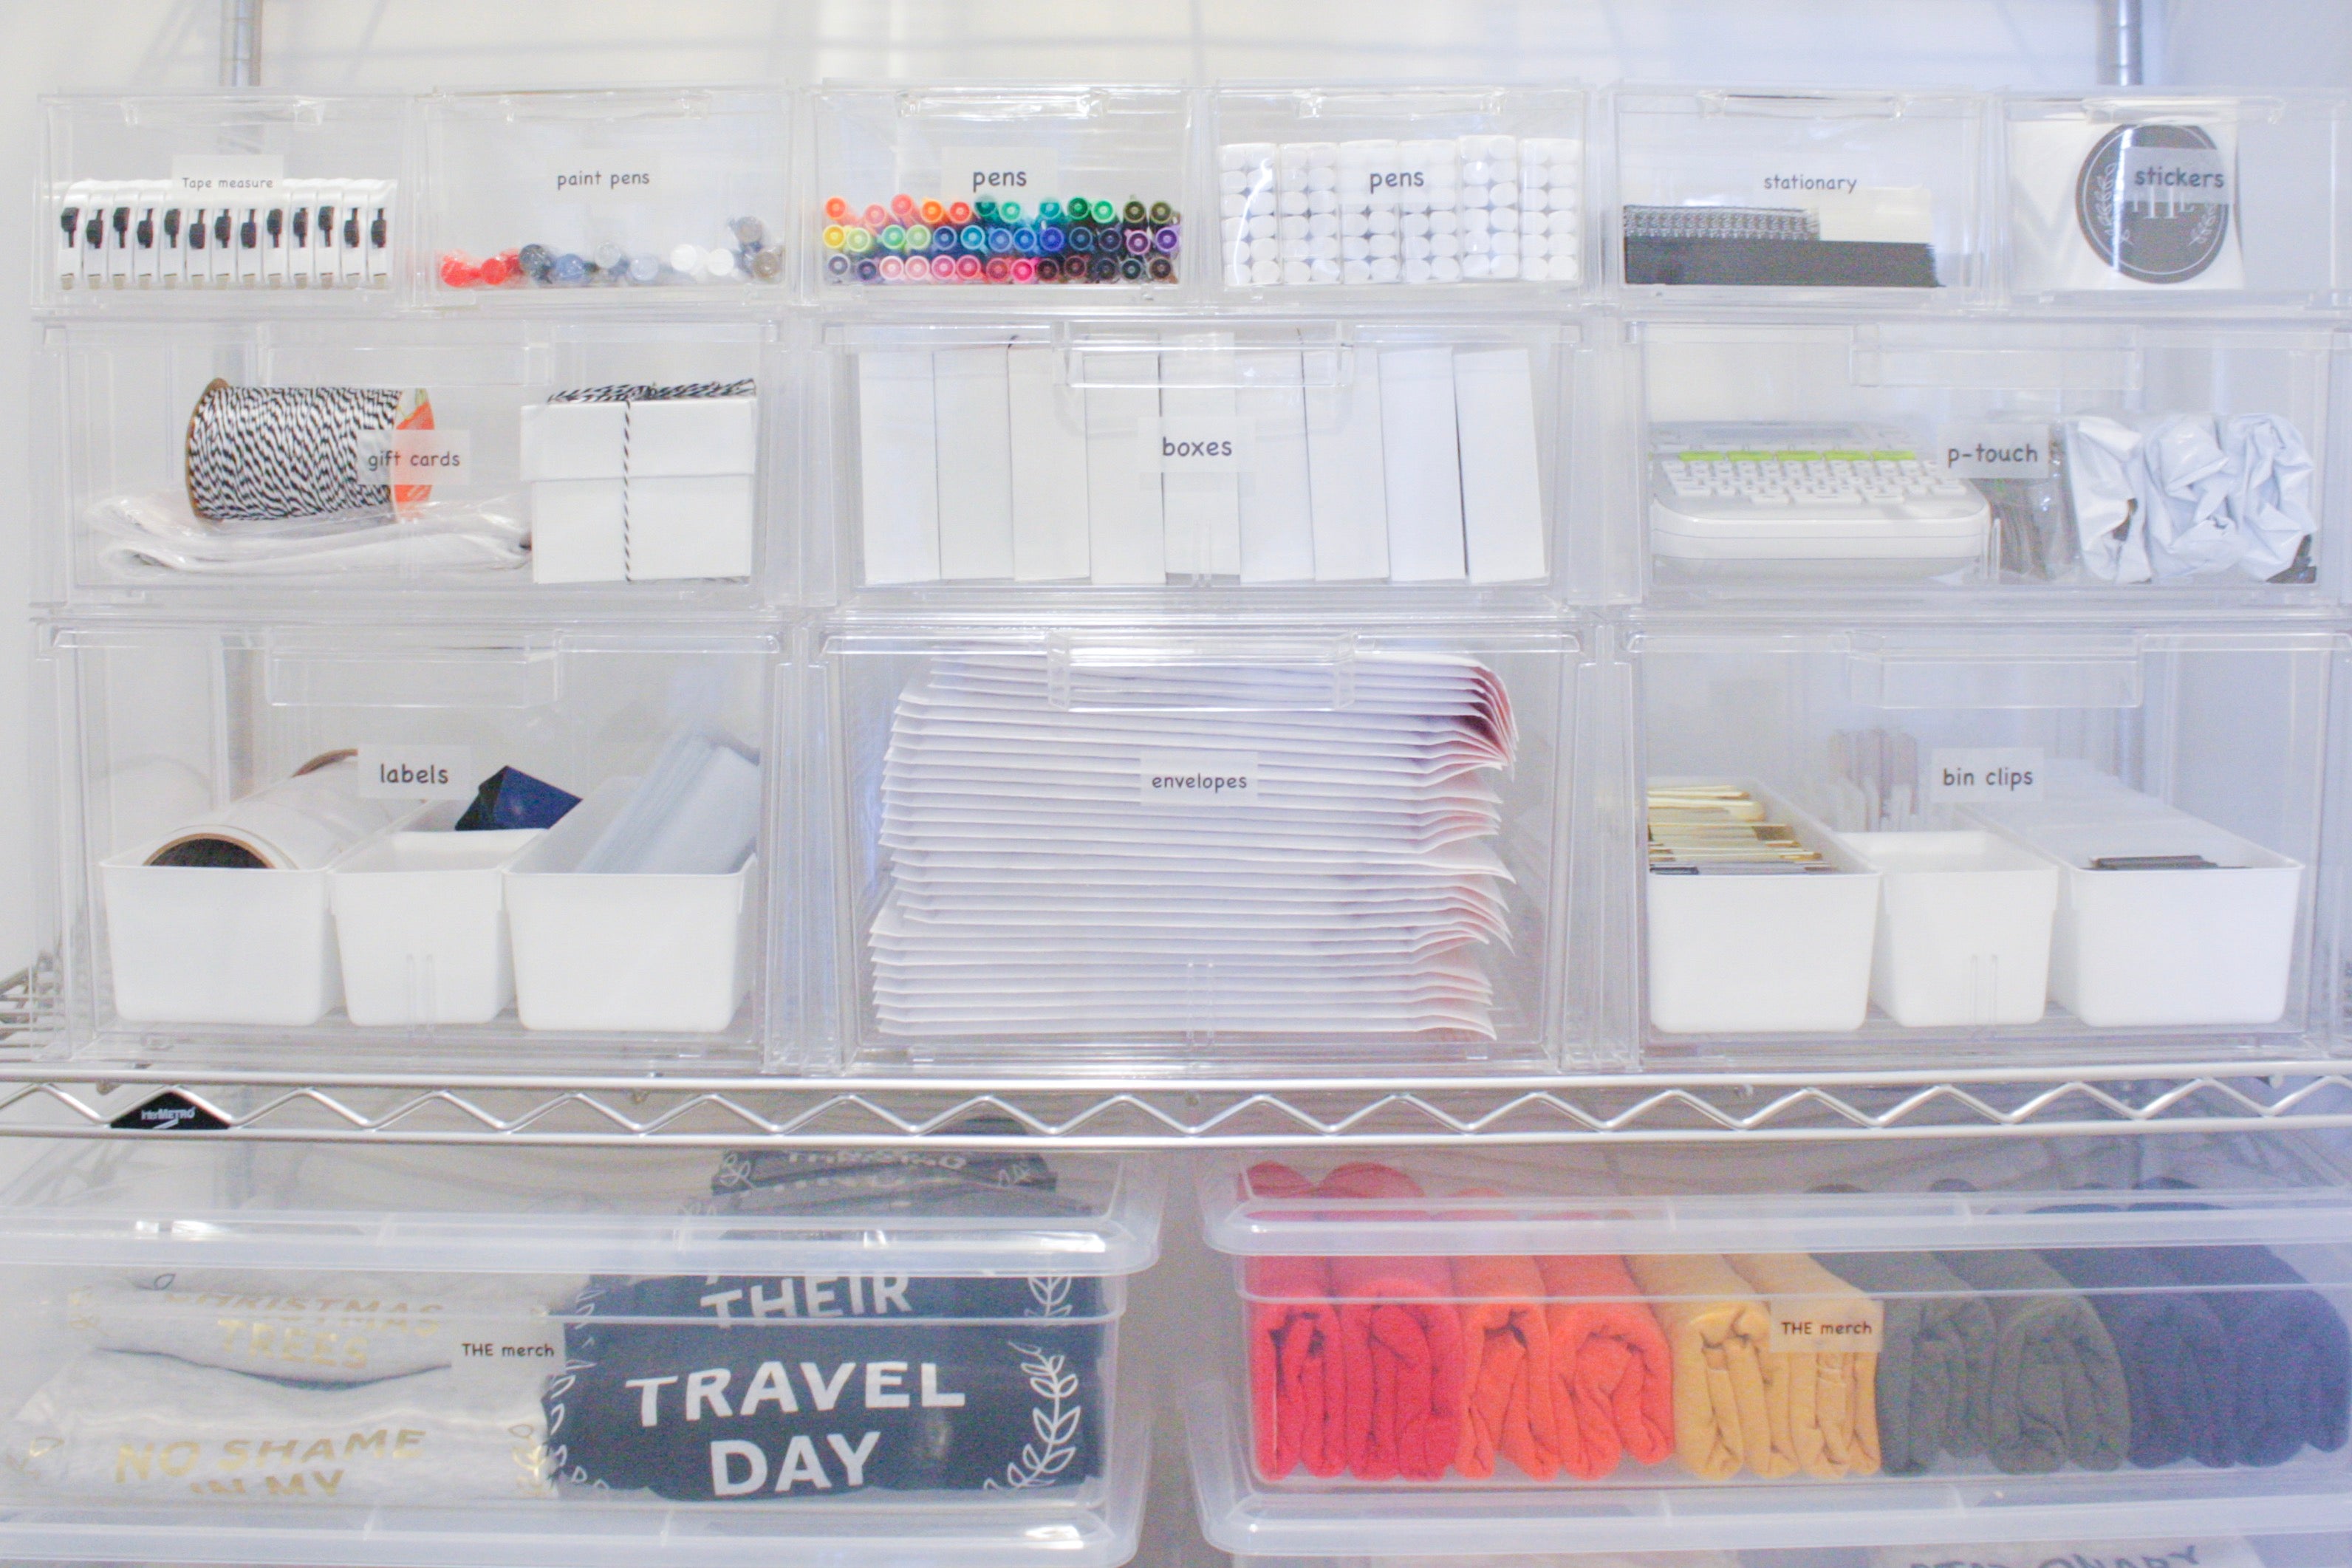 The Home Edit - The Home Edit Founders Share Their Top Organizing